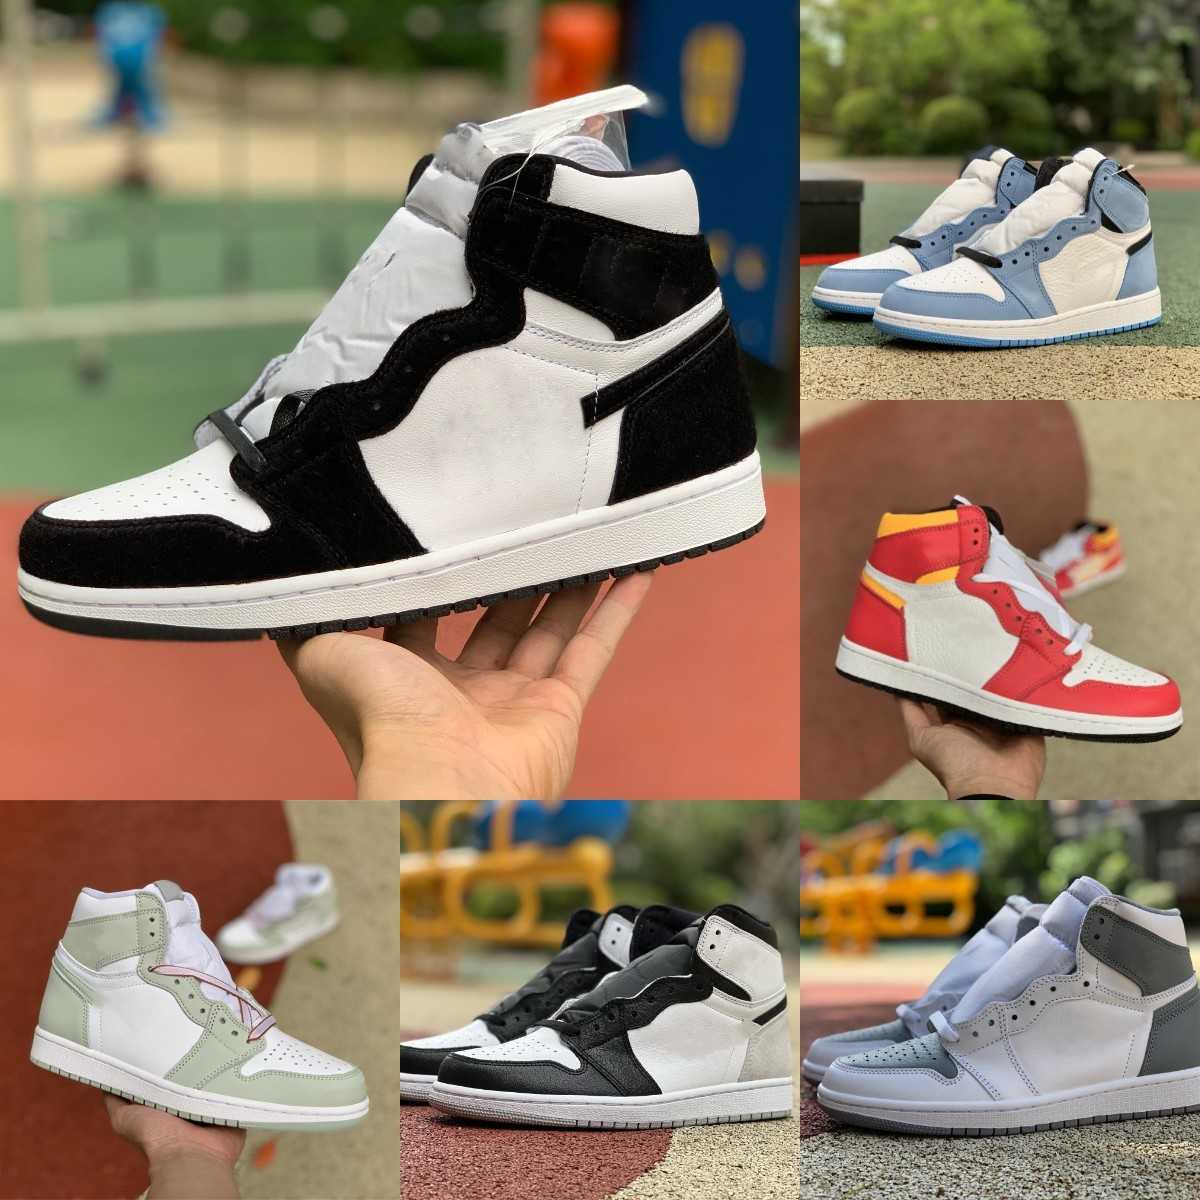 

2023 Jumpman 1 1s High Sports Basketball Shoes Mens Women Stealth Stage Haze Bio Hack Rebellionaire Military UNIVERSITY BLUE New Love DARK MOCHA Trainers Sneakers S1, Please contact us